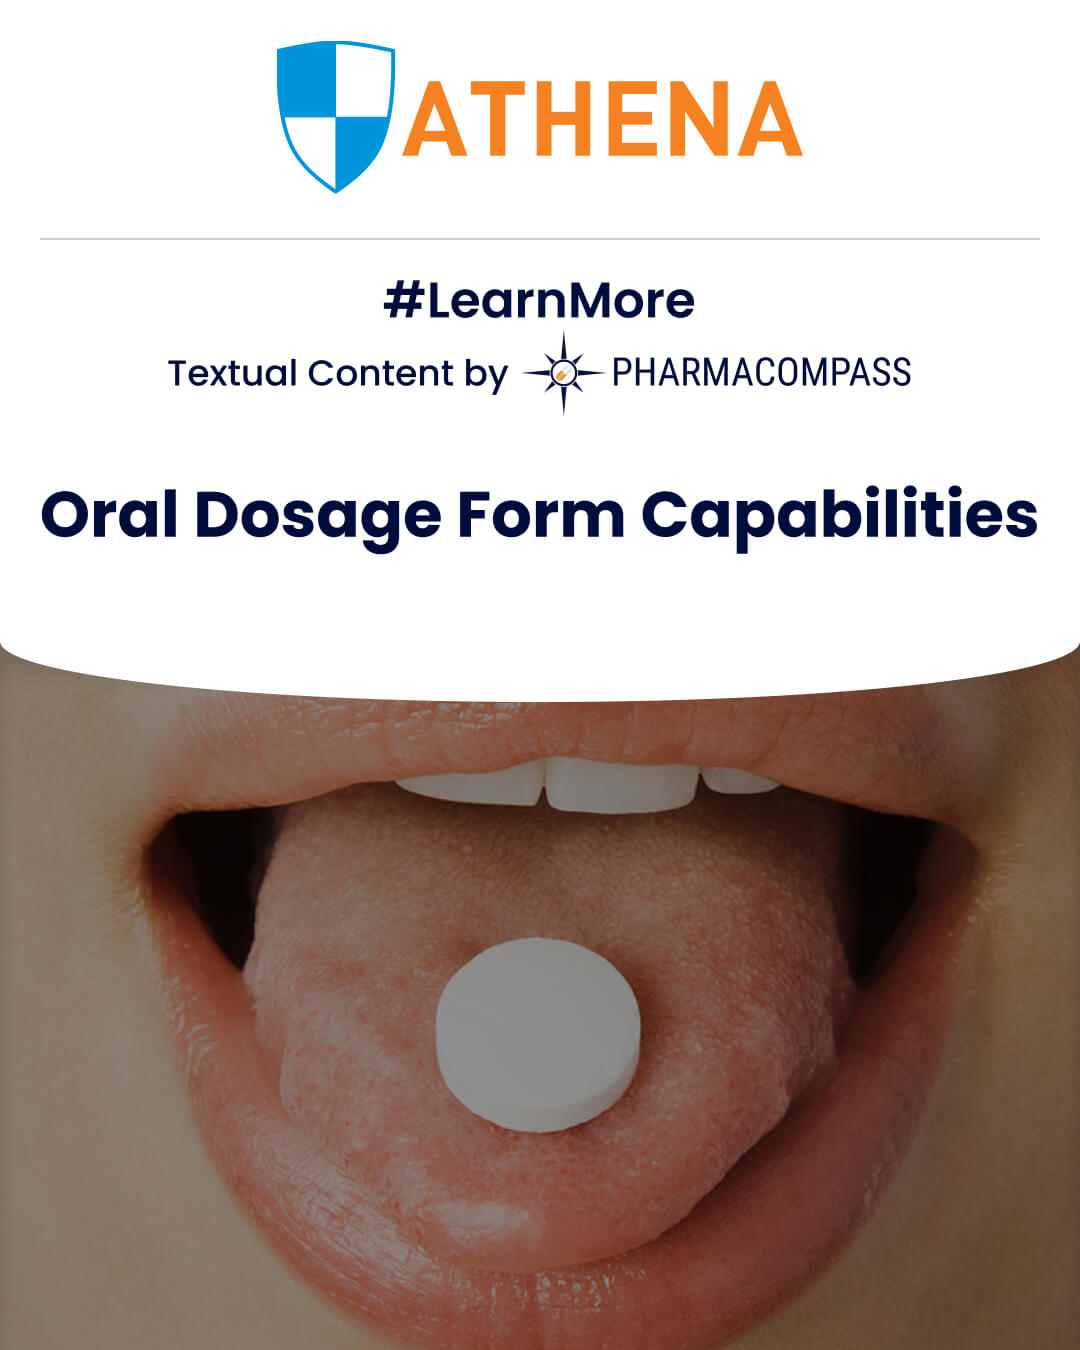 Overview of oral solid dosage forms (OSD) like orodispersible tablets (ODTs) & more on Athena